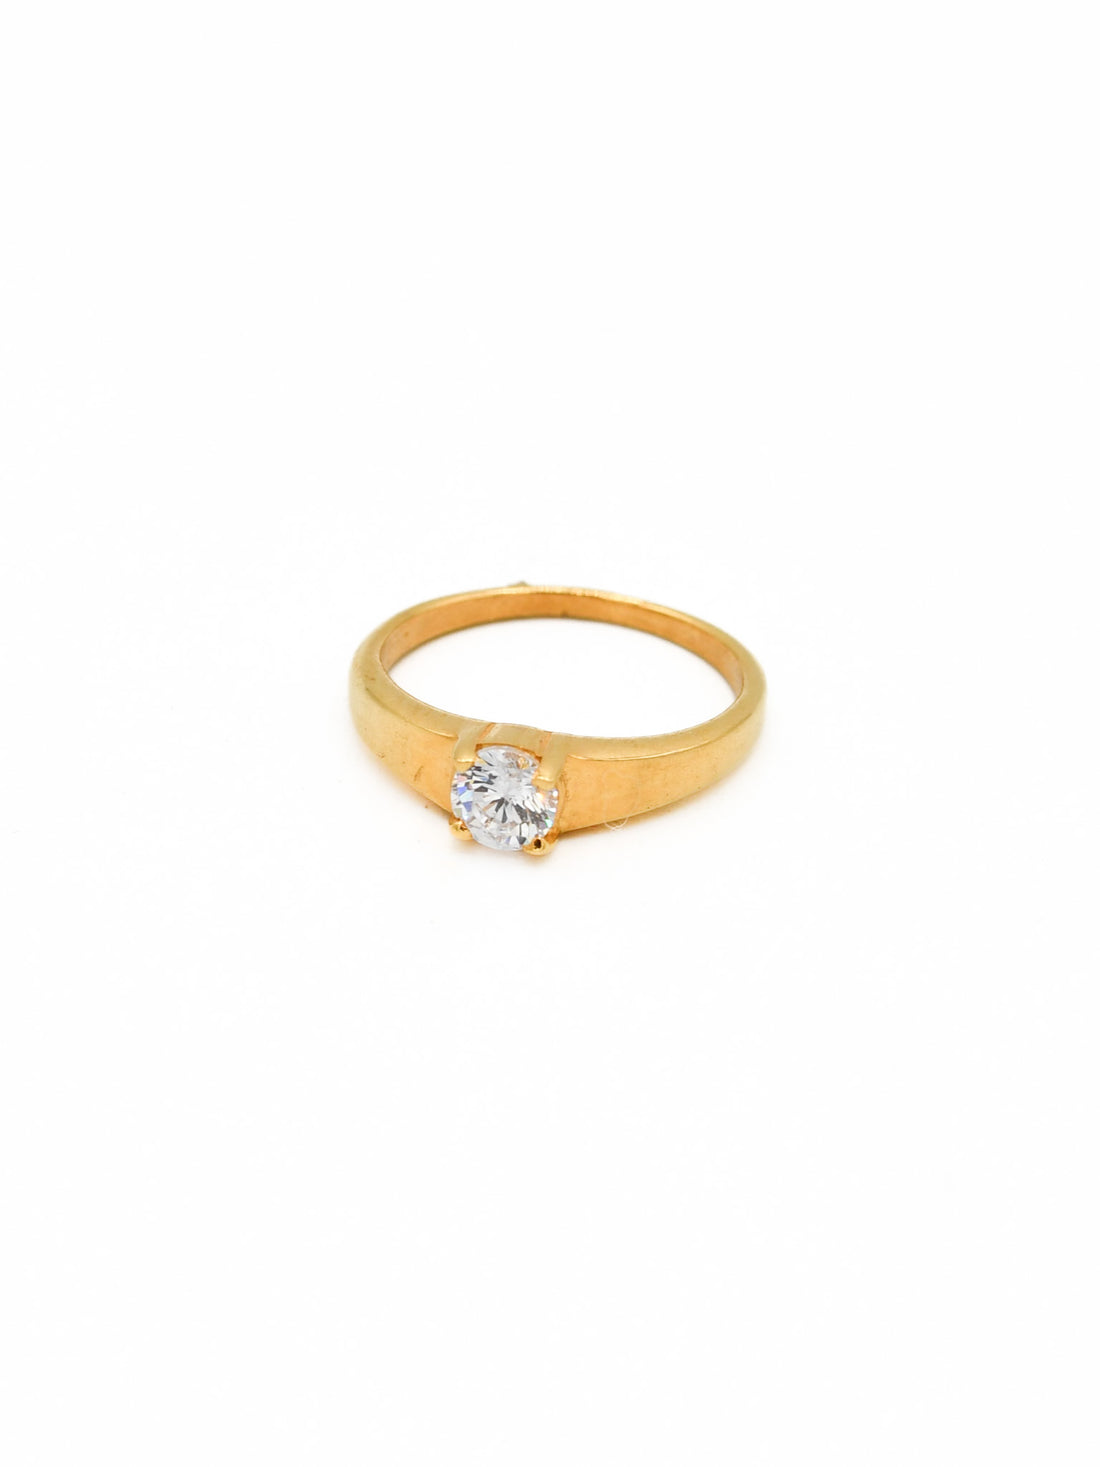 22ct Gold CZ Baby Ring - Roop Darshan